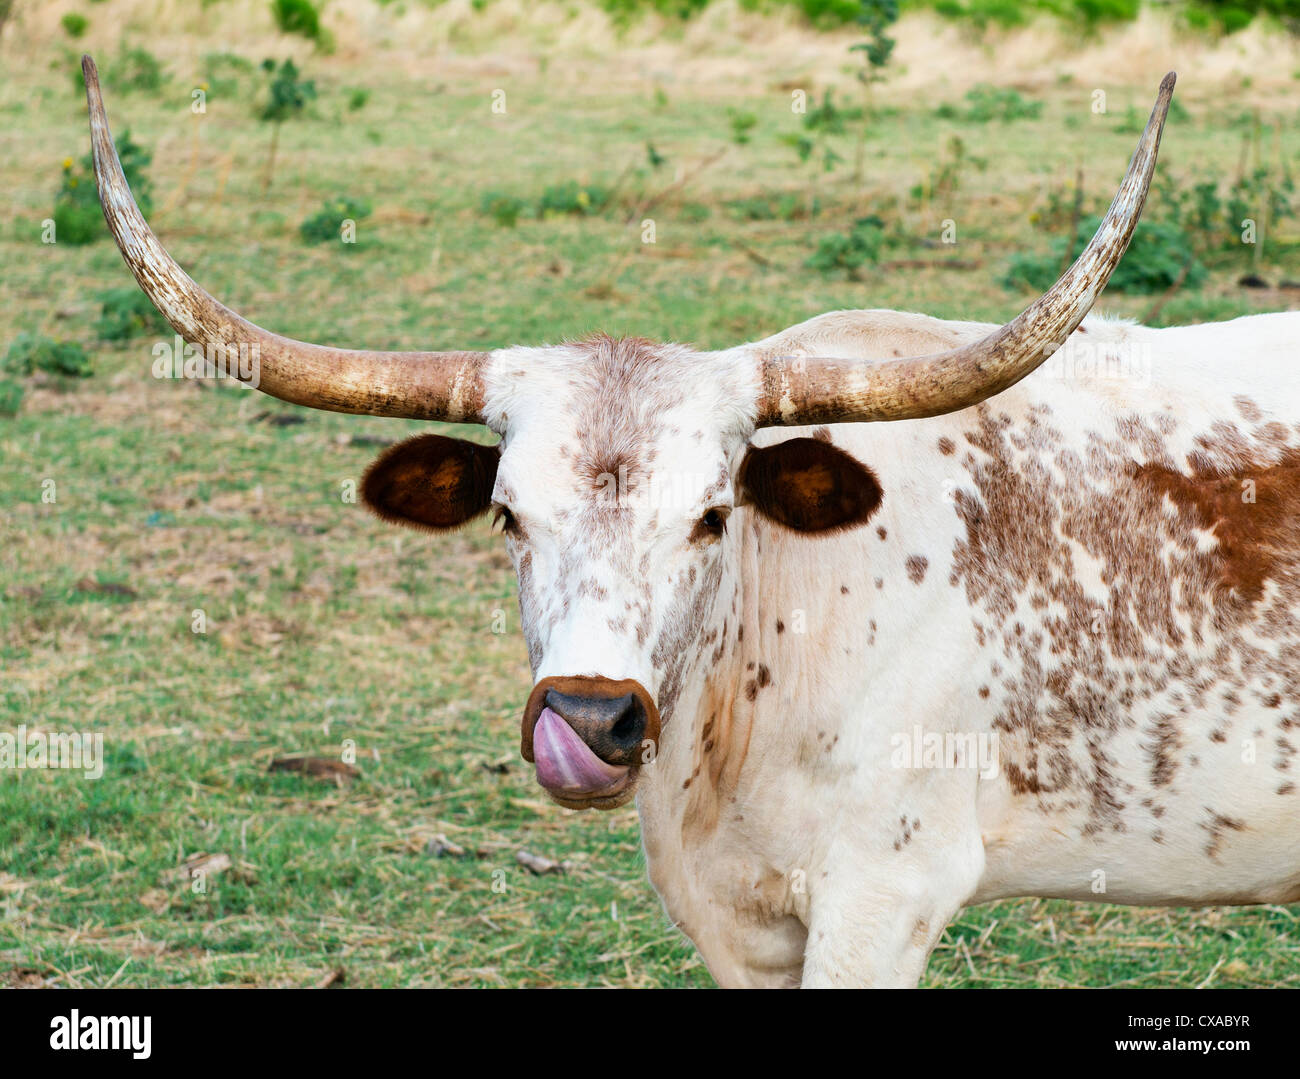 A Texas Longhorn, Bos bos, standing at pasture. A white cow with red mottled sides. Closeup. Oklahoma, USA. Stock Photo